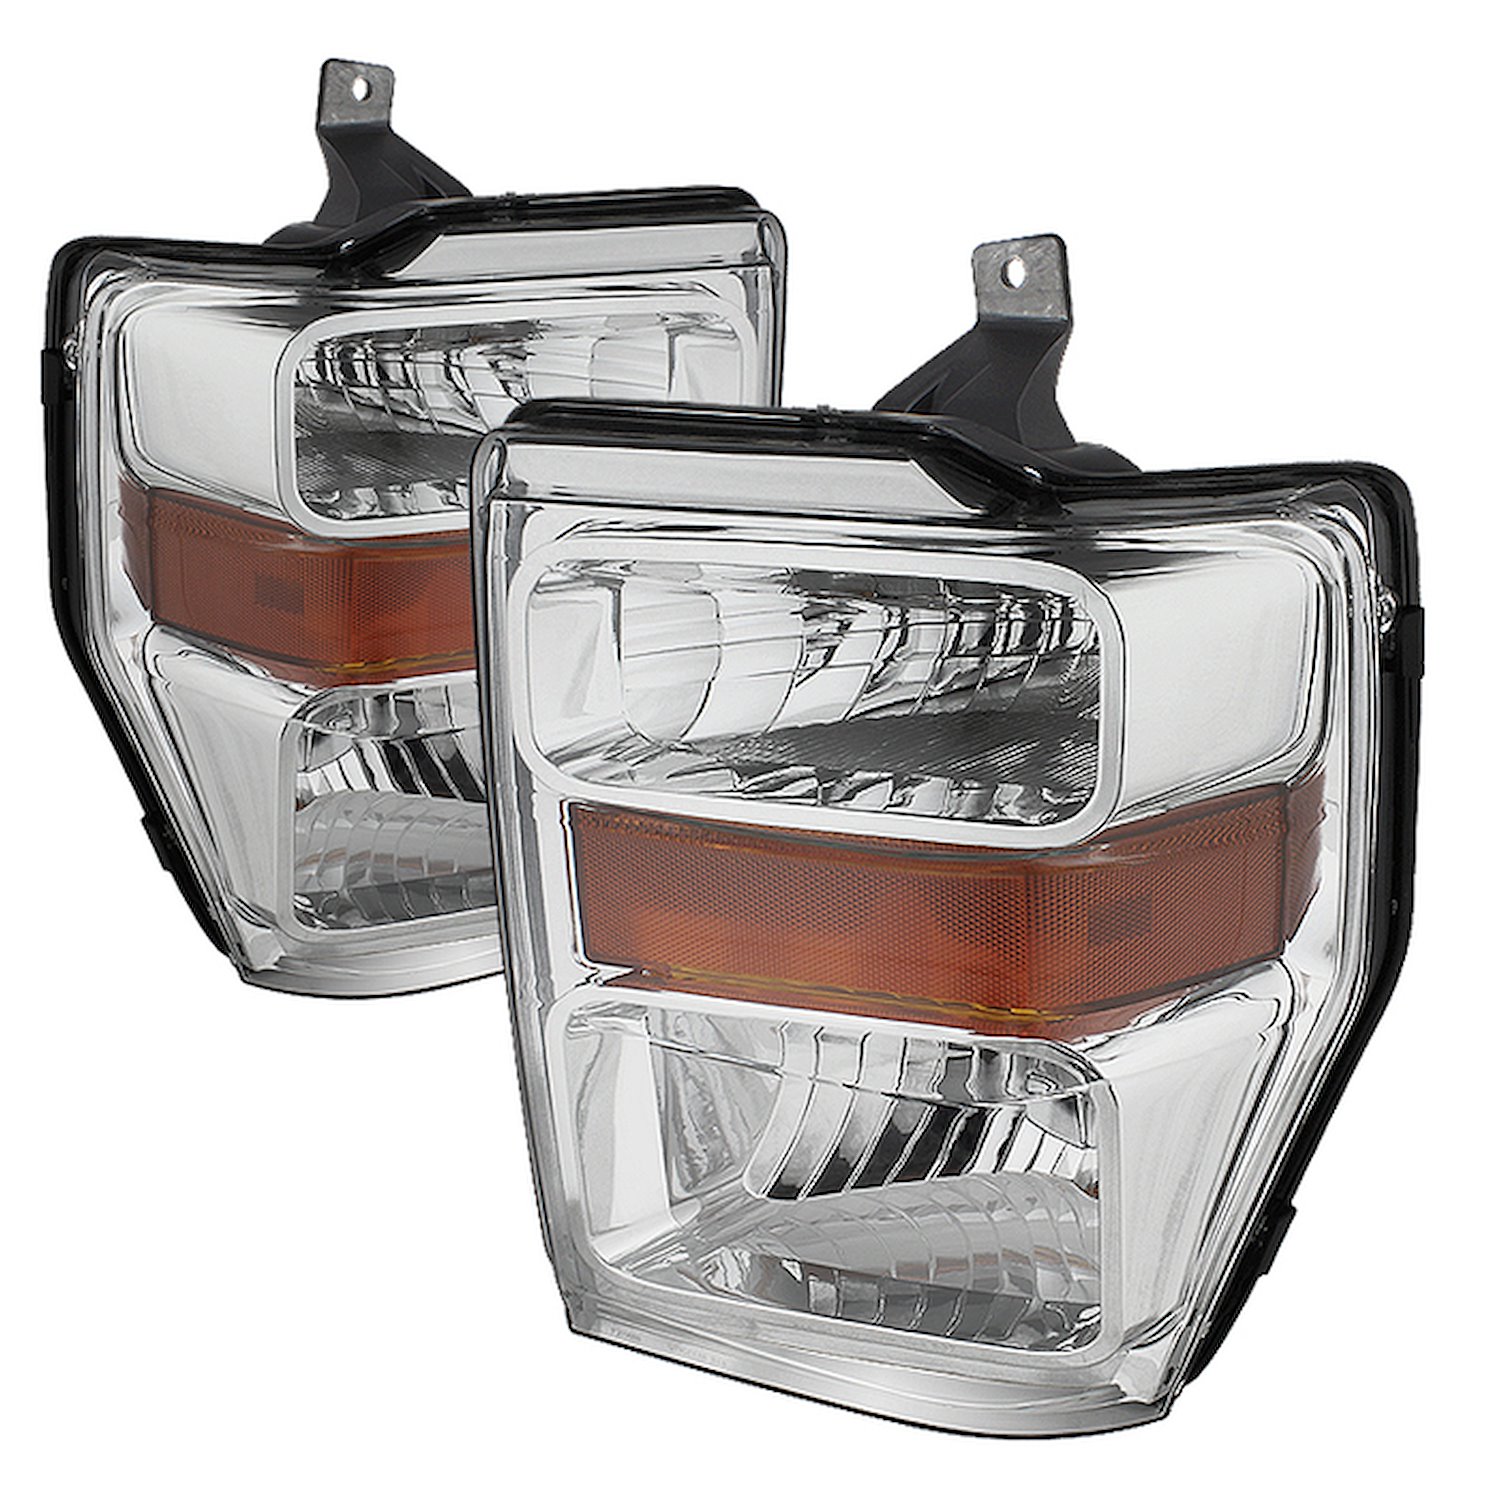 xTune OEM Style Crystal Headlights 2008-2010 Ford F250/350/450 Super Duty